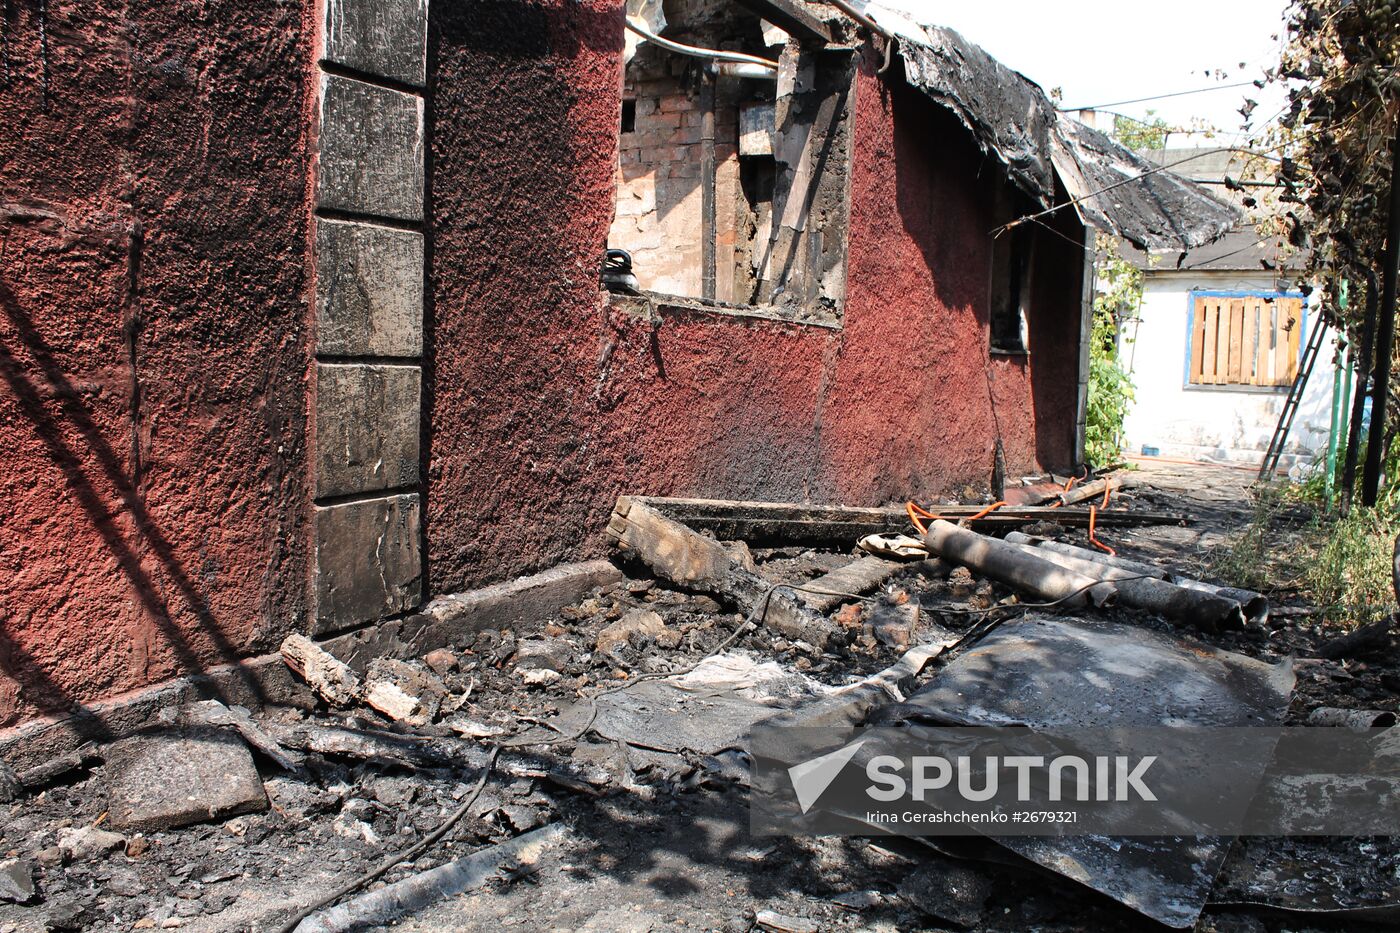 Aftermath of shelling in Donetsk